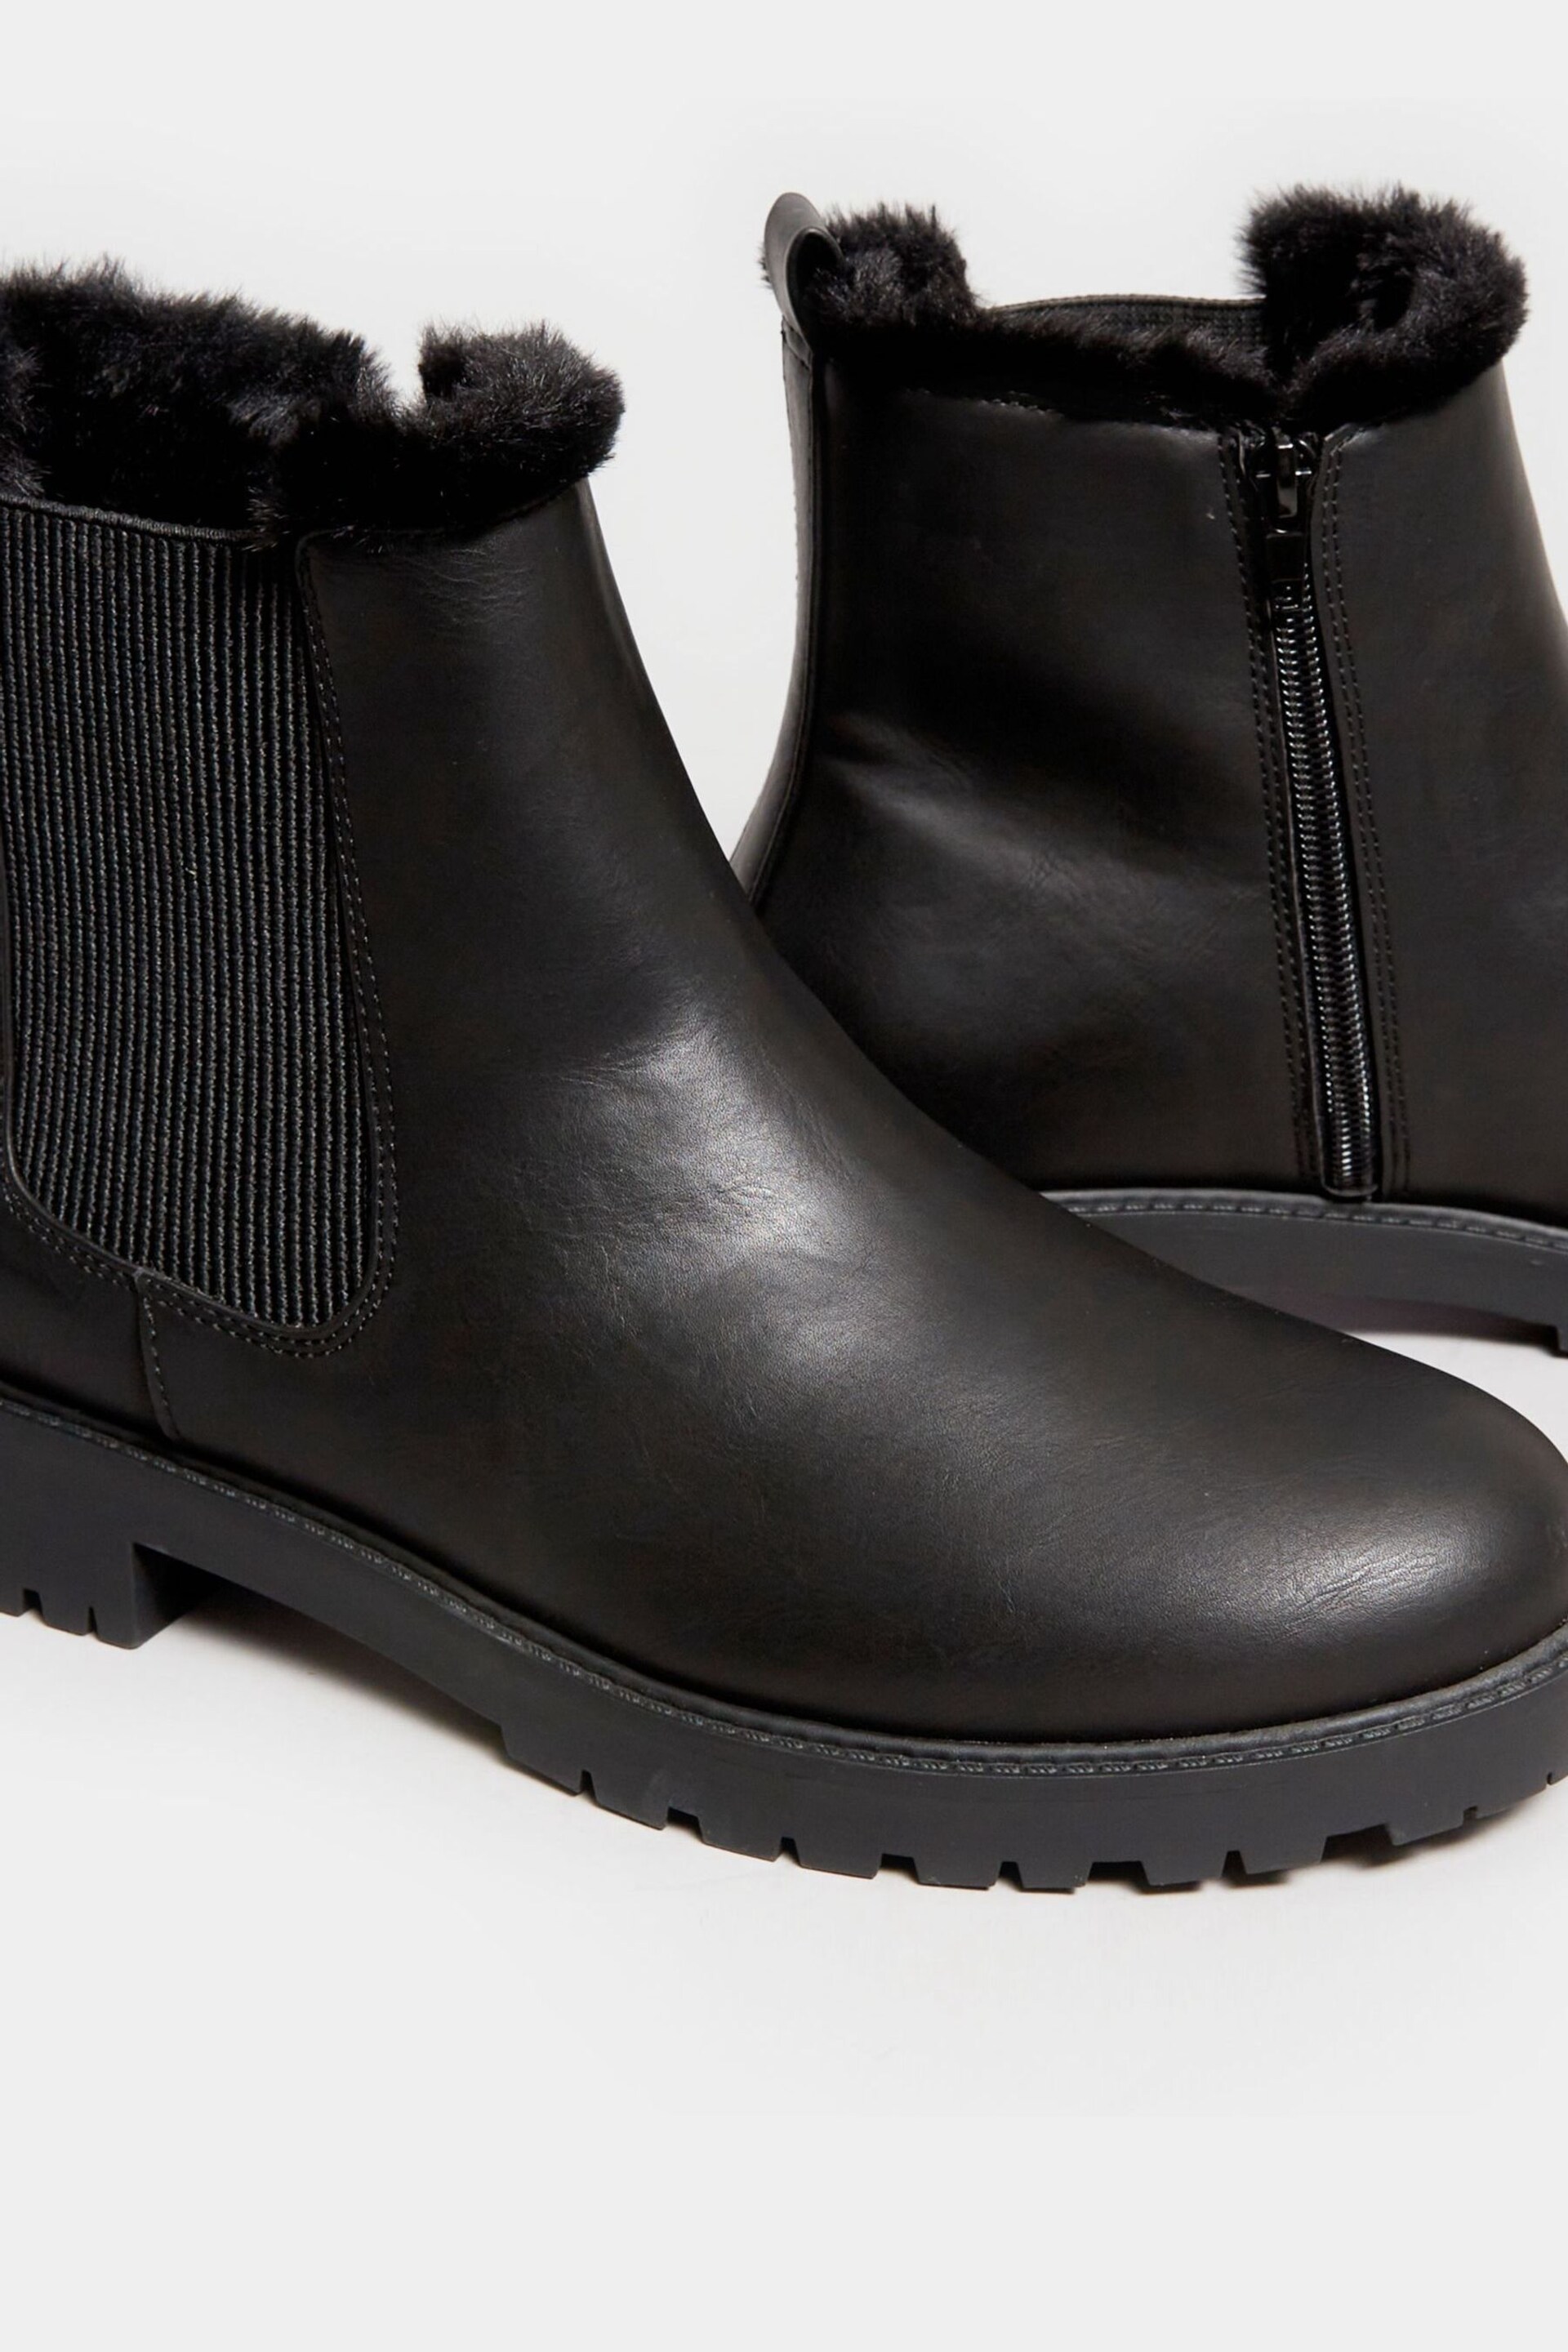 Yours Curve Black Wide Fit Chelsea Faux Fur Lined Boots - Image 4 of 5